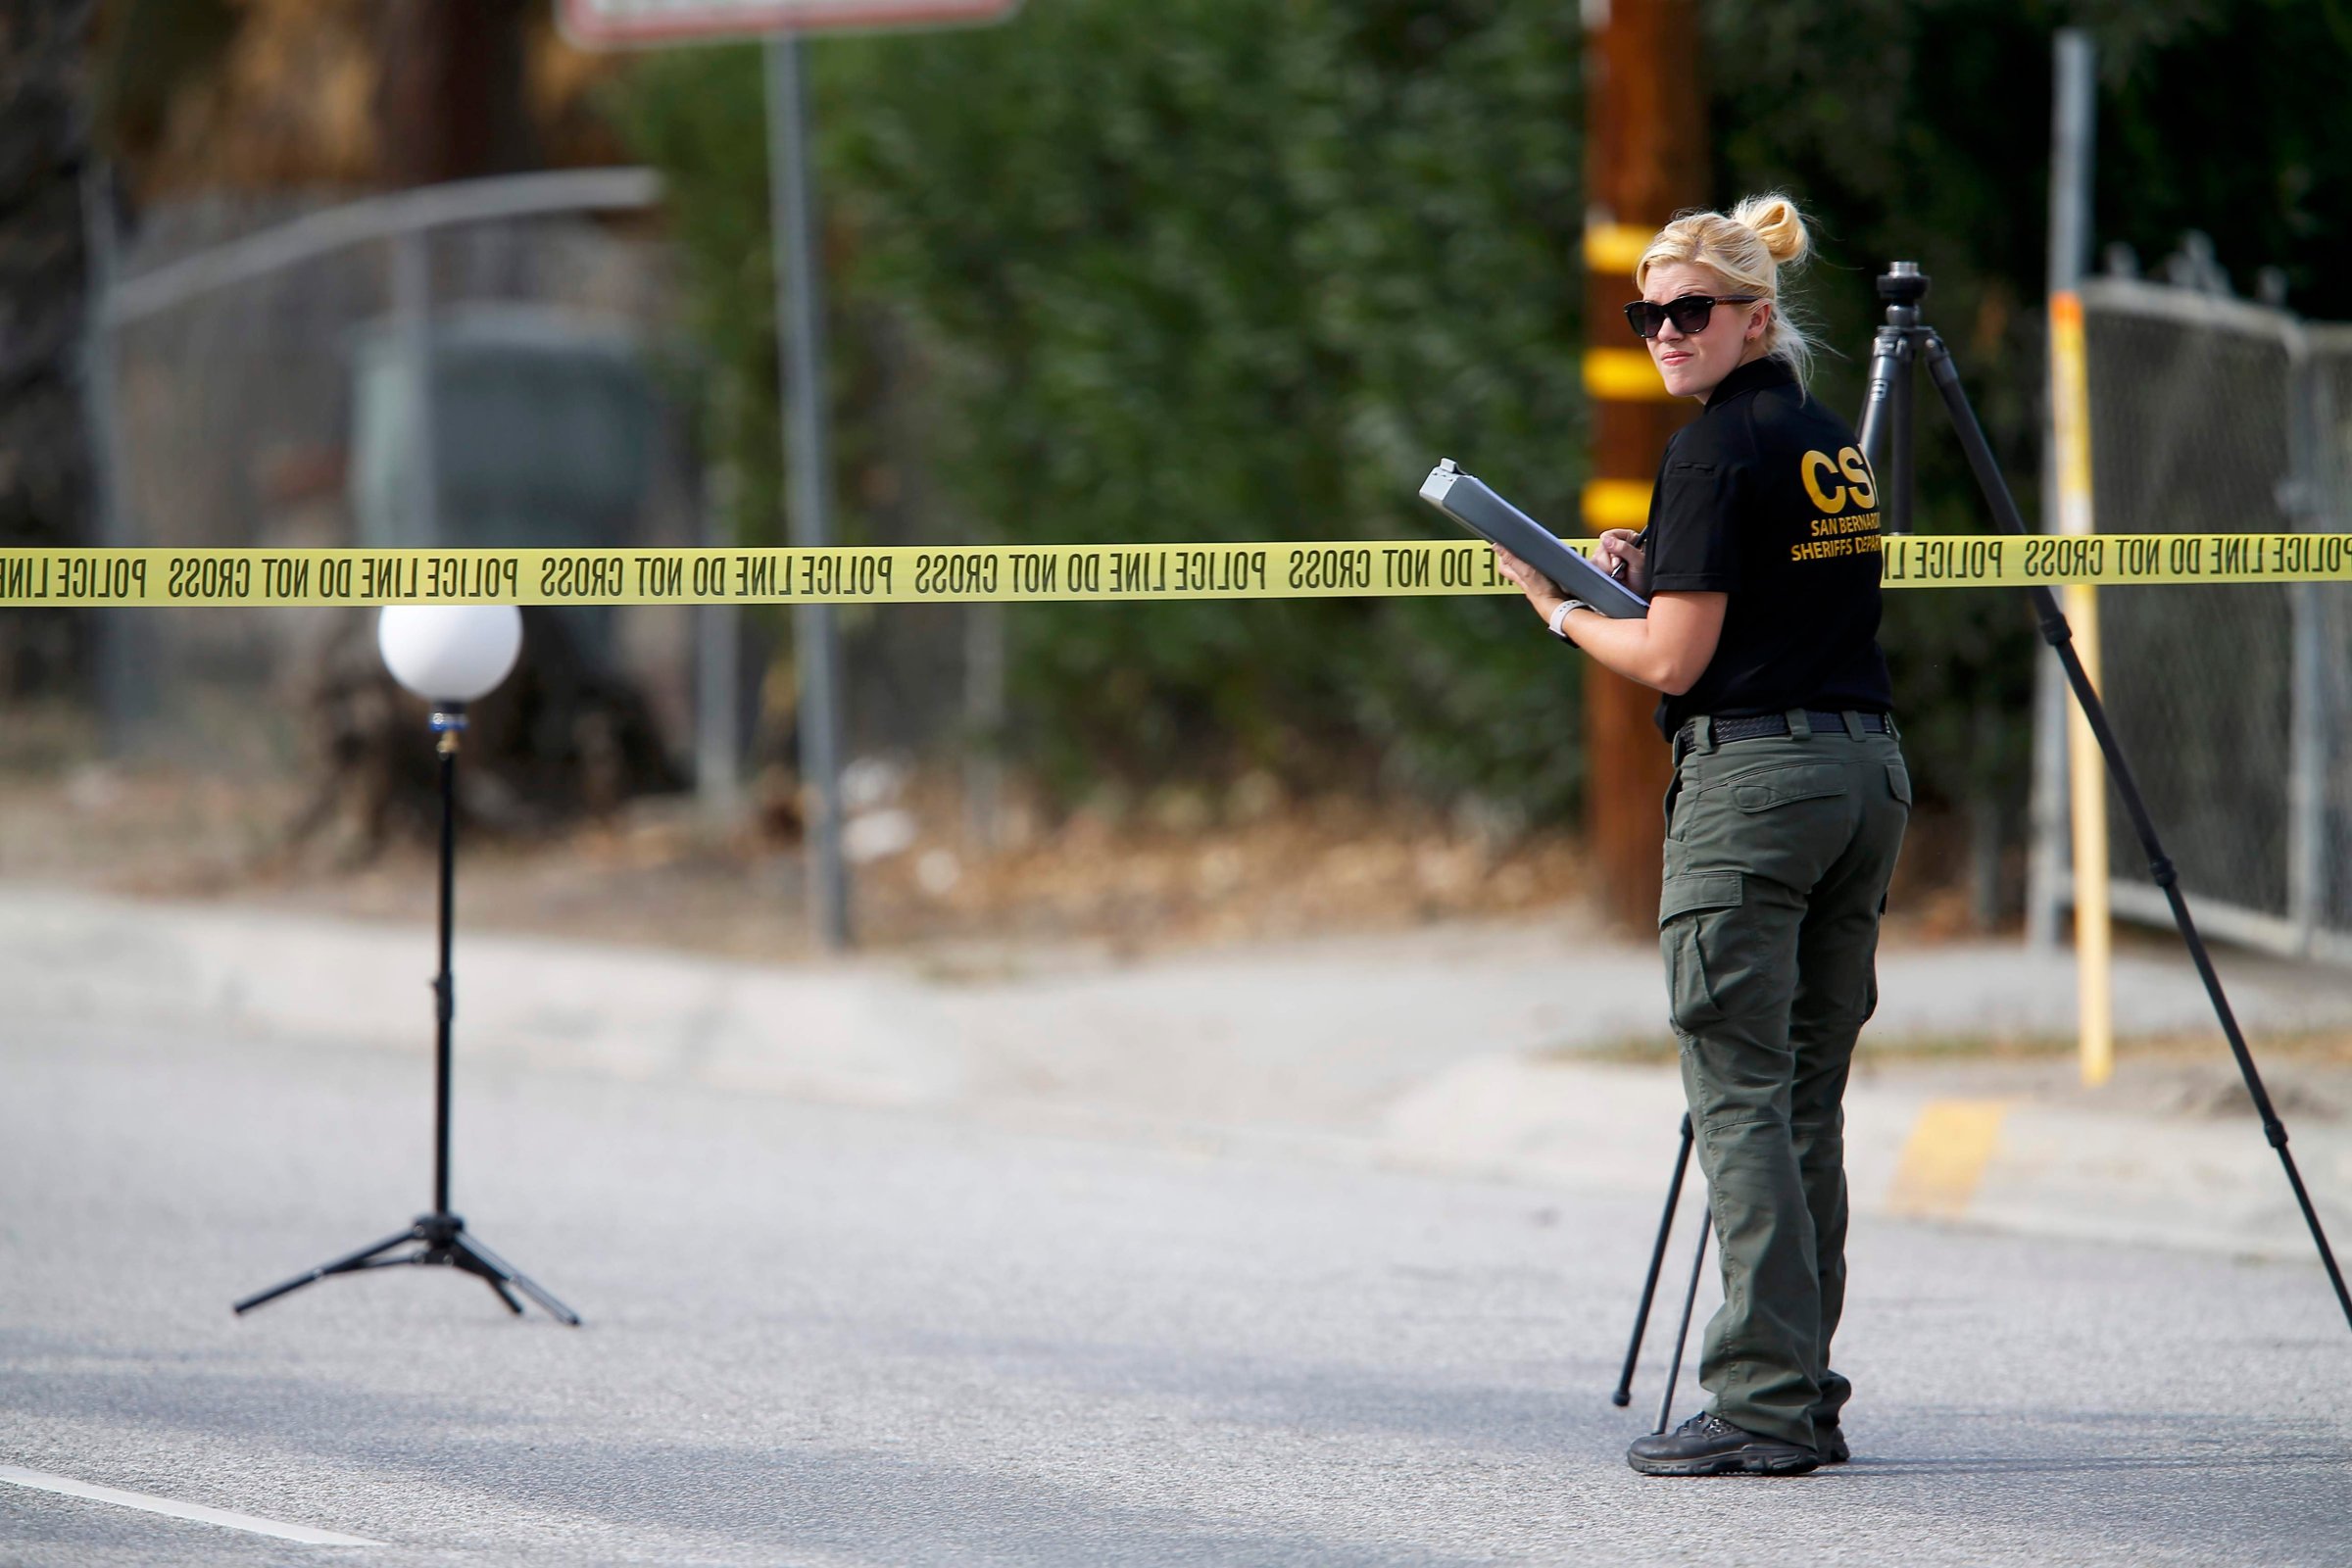 A Sheriff's Office Crime Scene Iinvestigator inspects the scene around an SUV where two suspects were shot by police following a mass shooting in San Bernardino